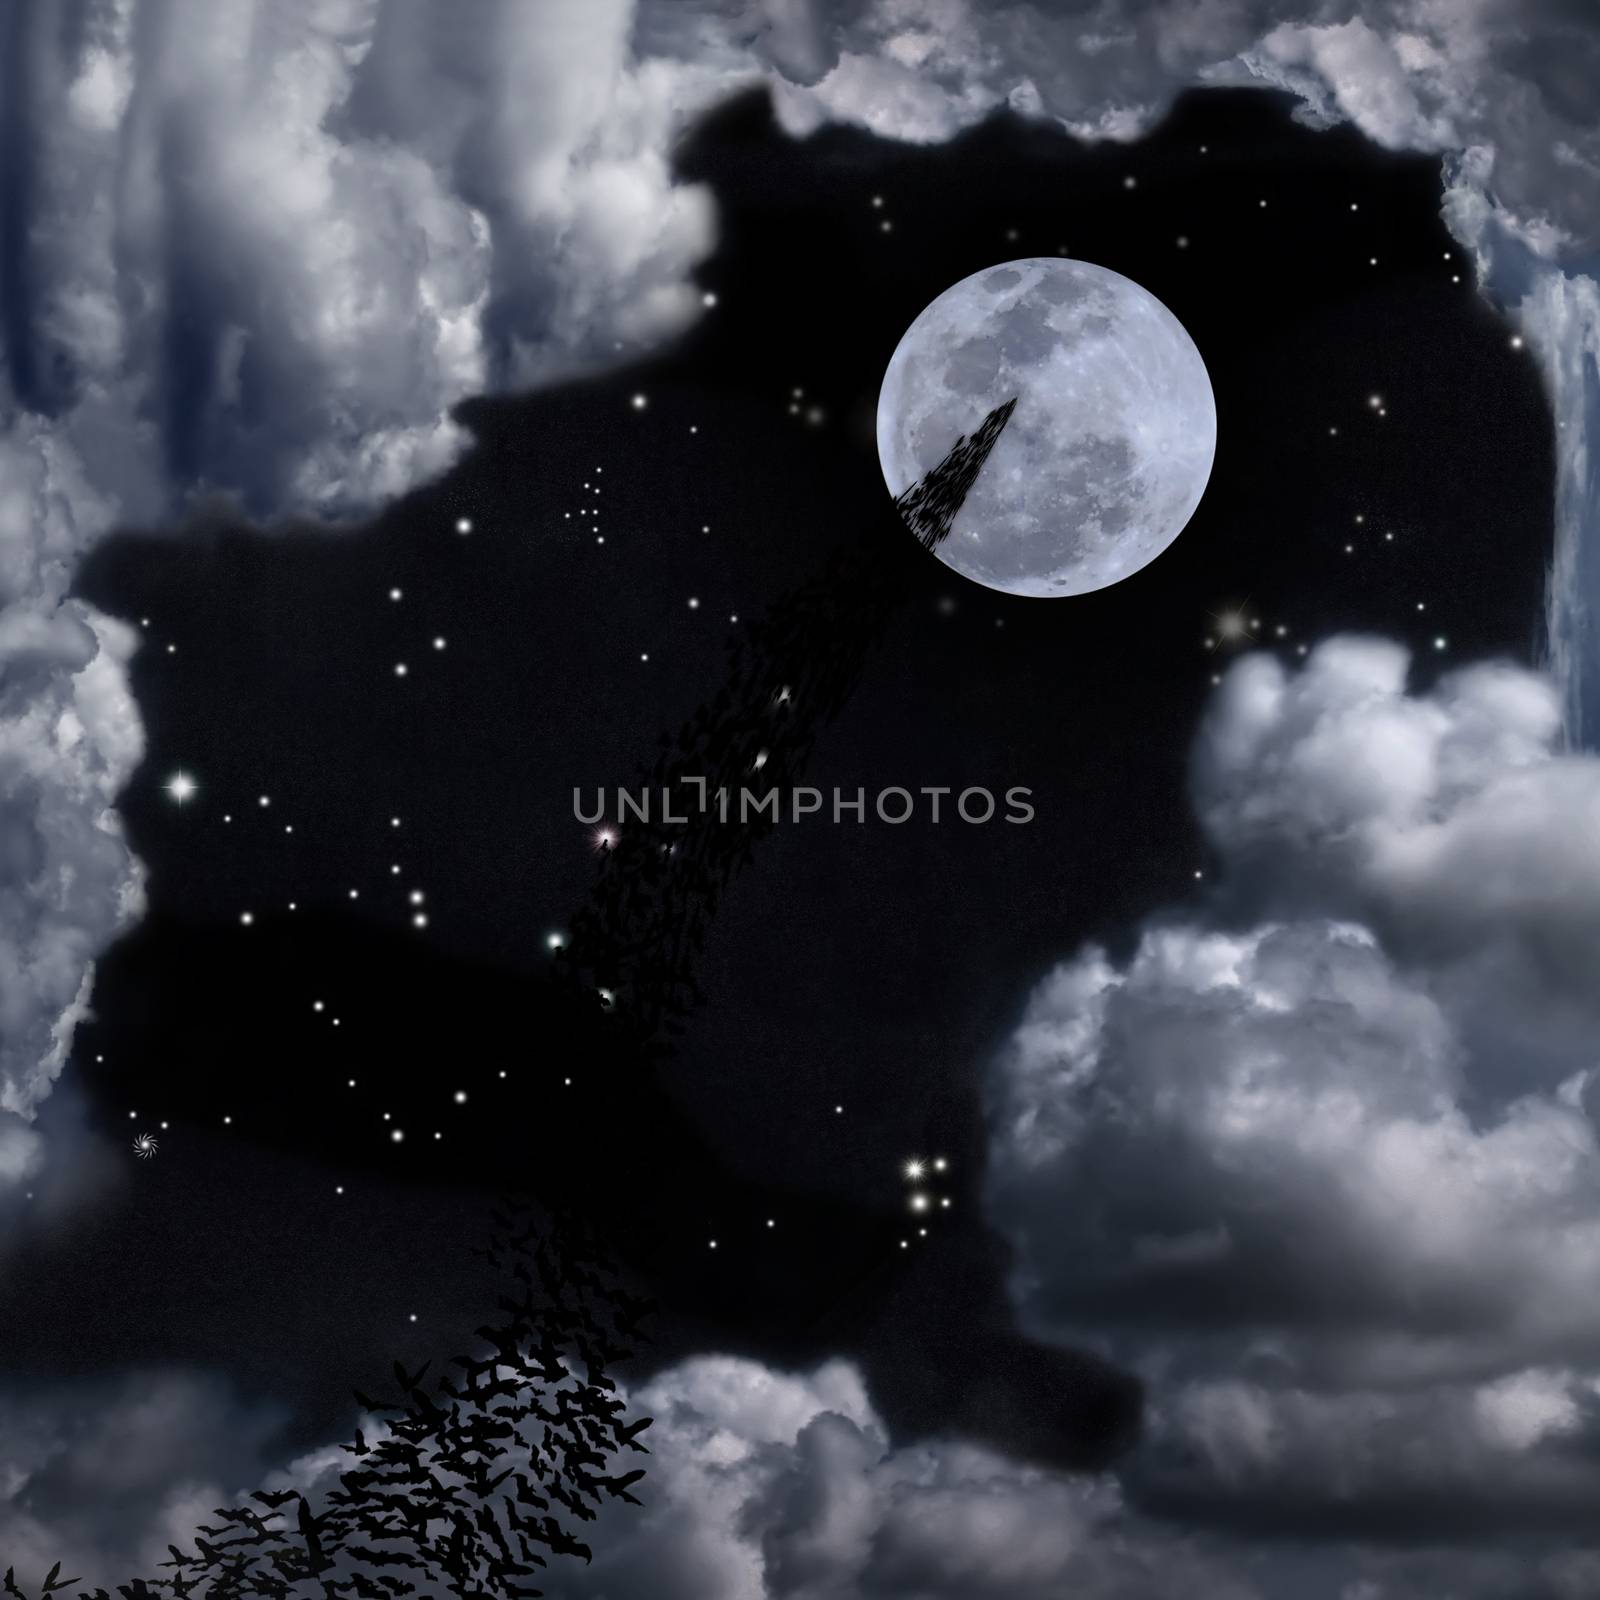 Bats flying again full moon, stars, some constellation and fantasy cloudy may use for horrible theme or halloween theme